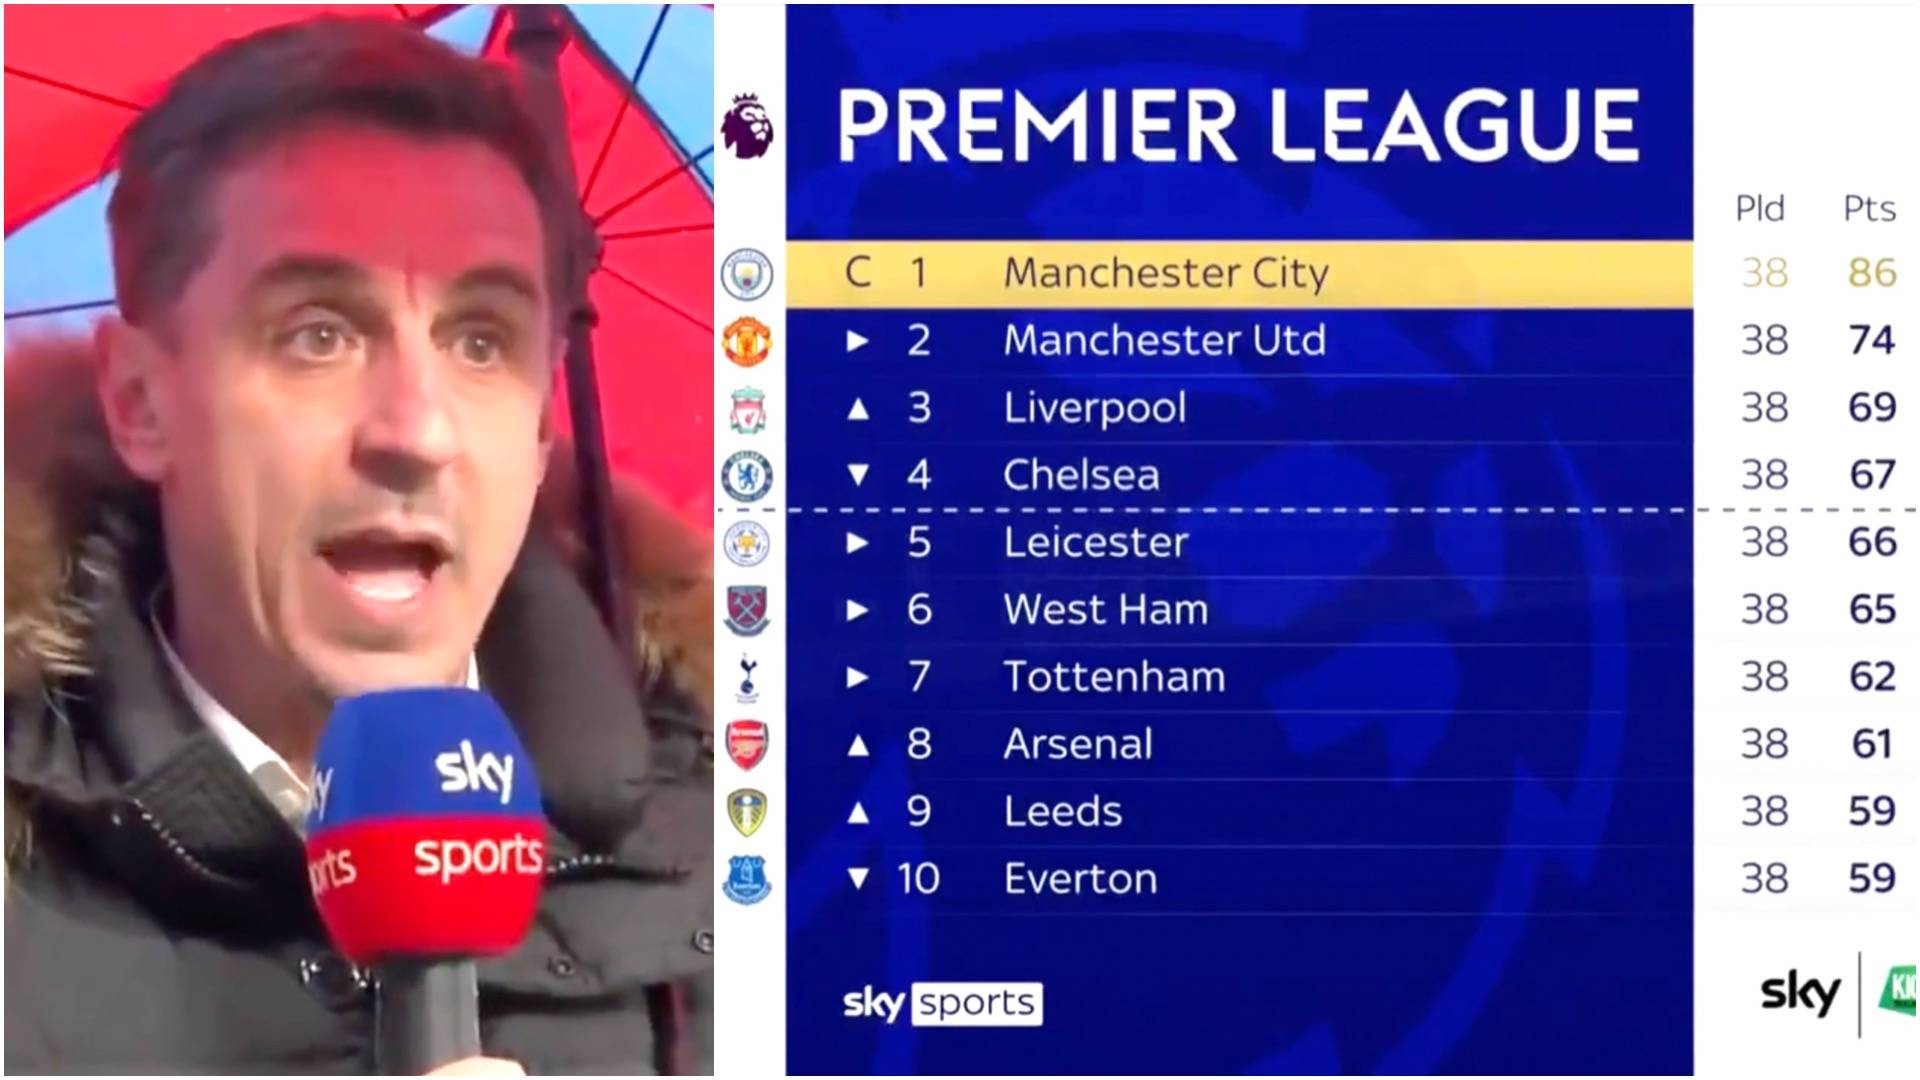 Gary Neville’s reaction after Liverpool finished third on final day of last season was priceless